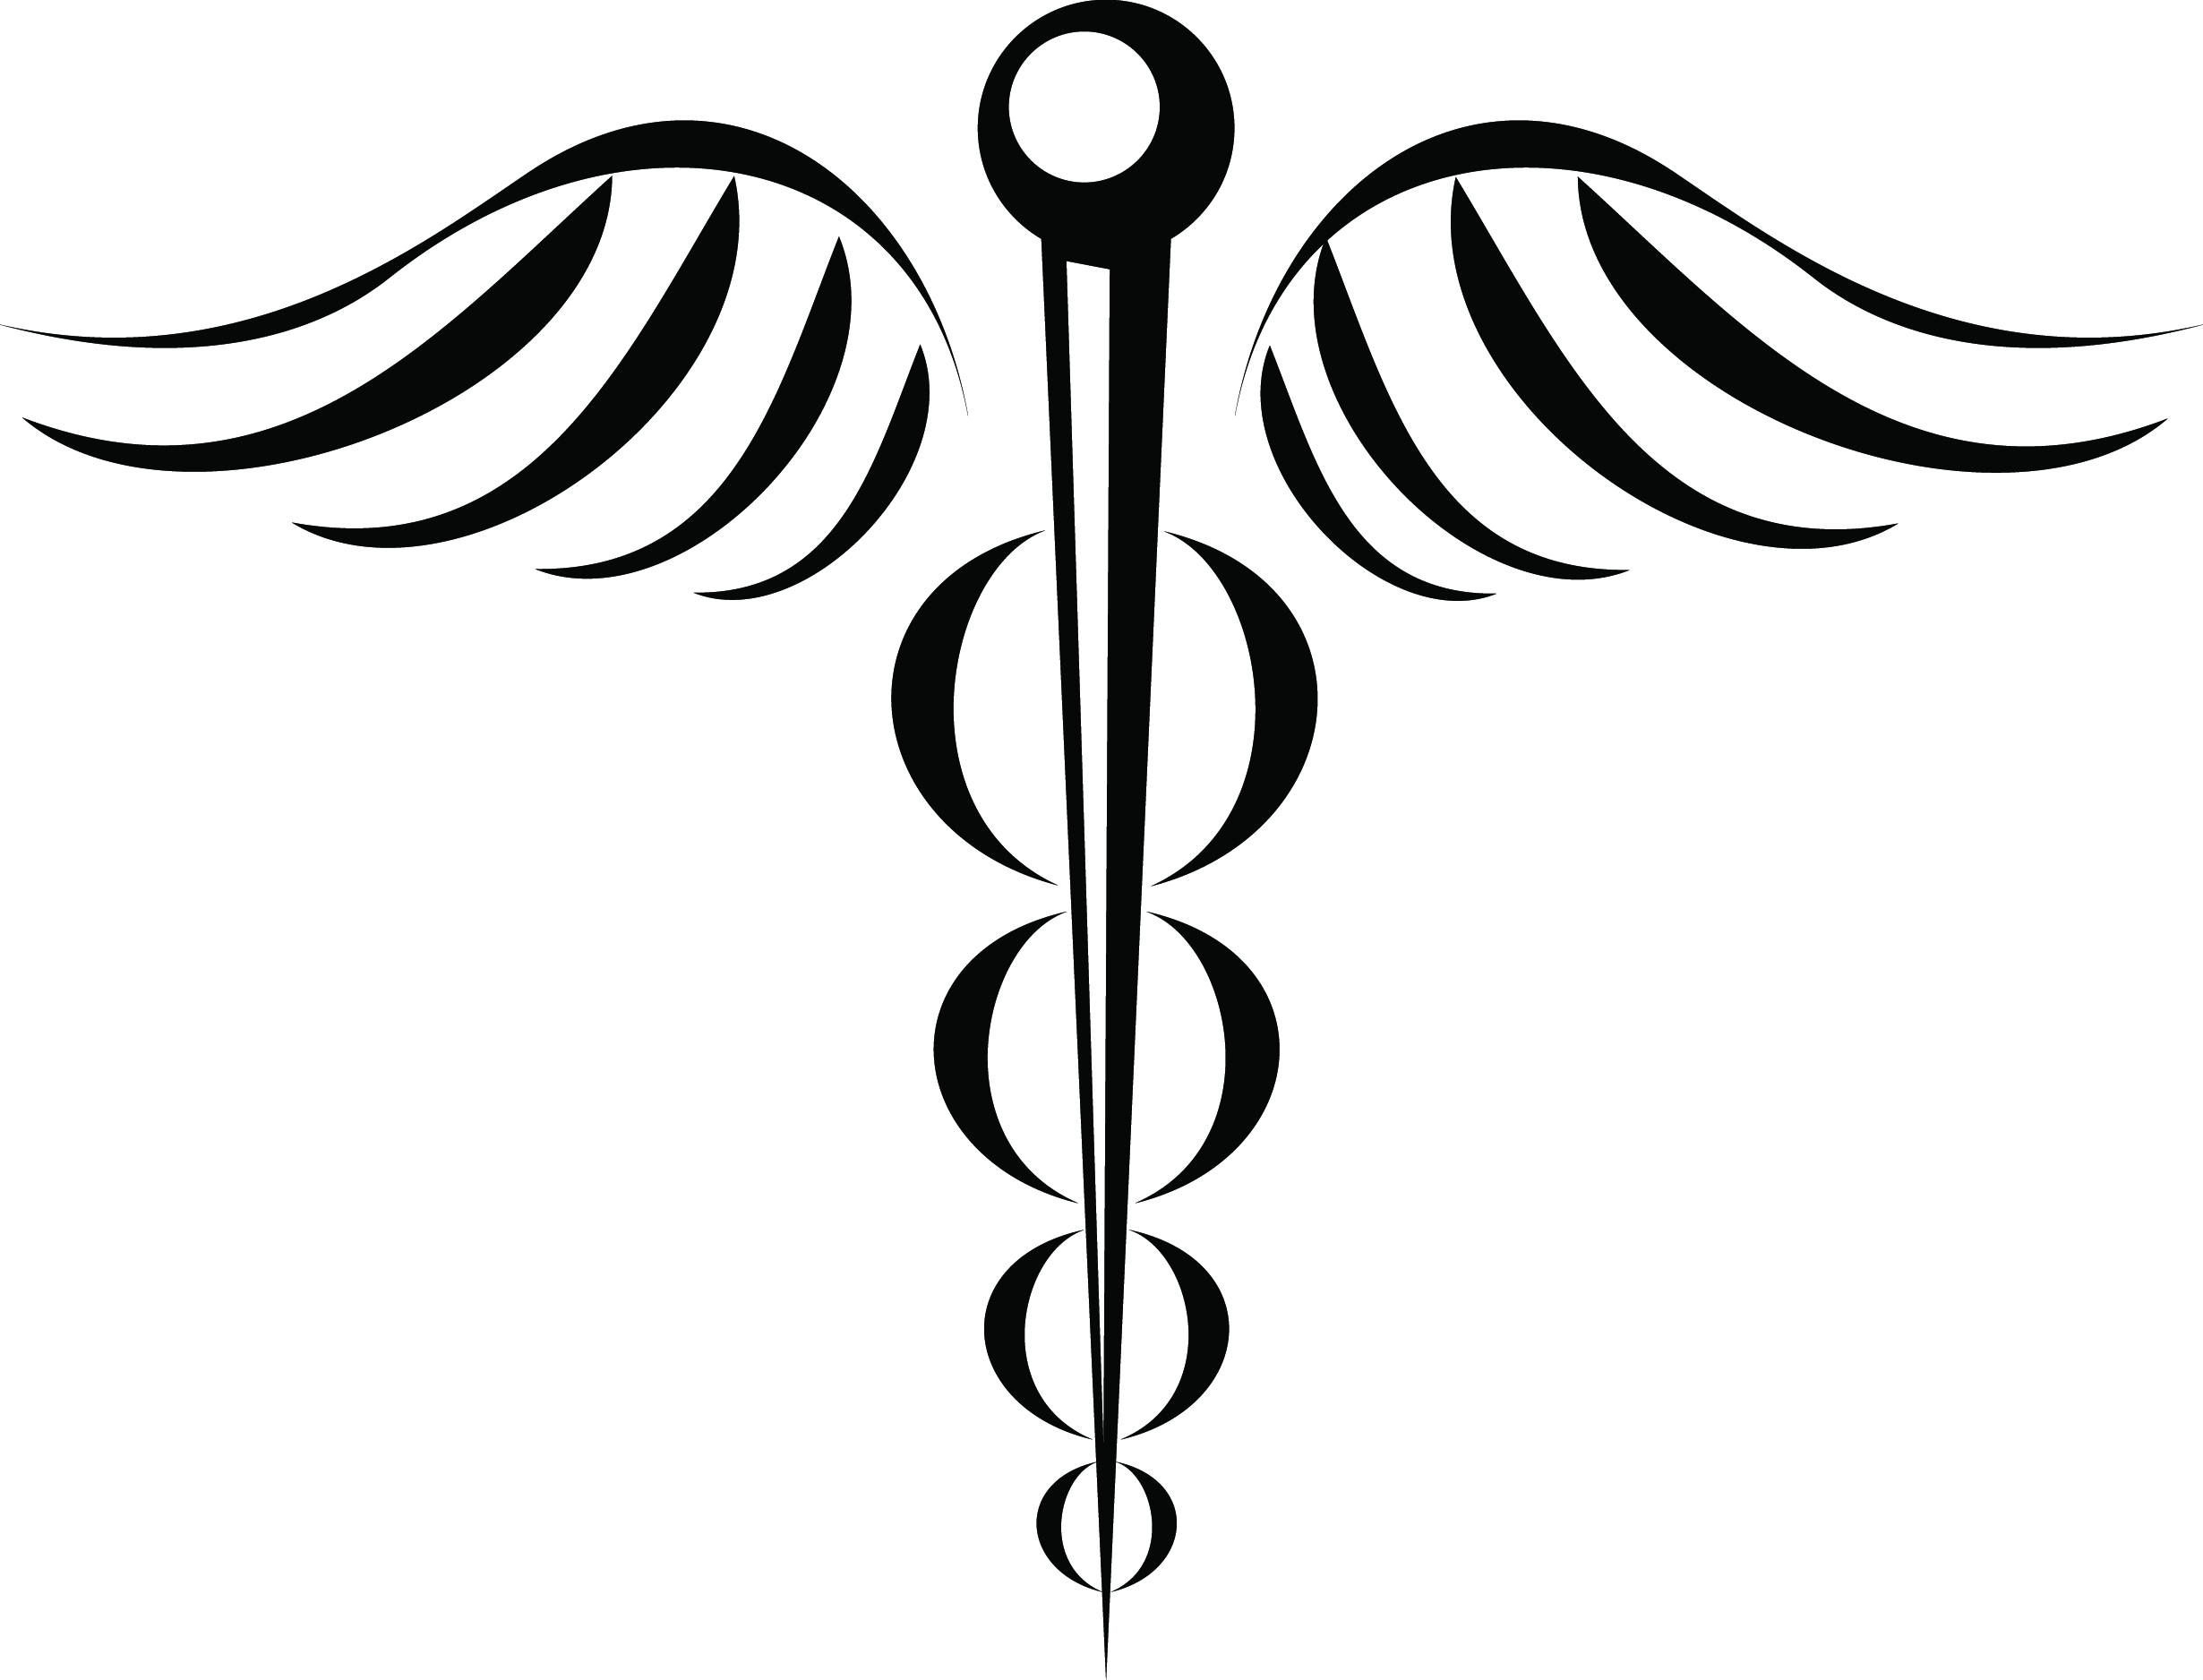 34 Hospital Symbol Free Cliparts That You Can Download To You Computer